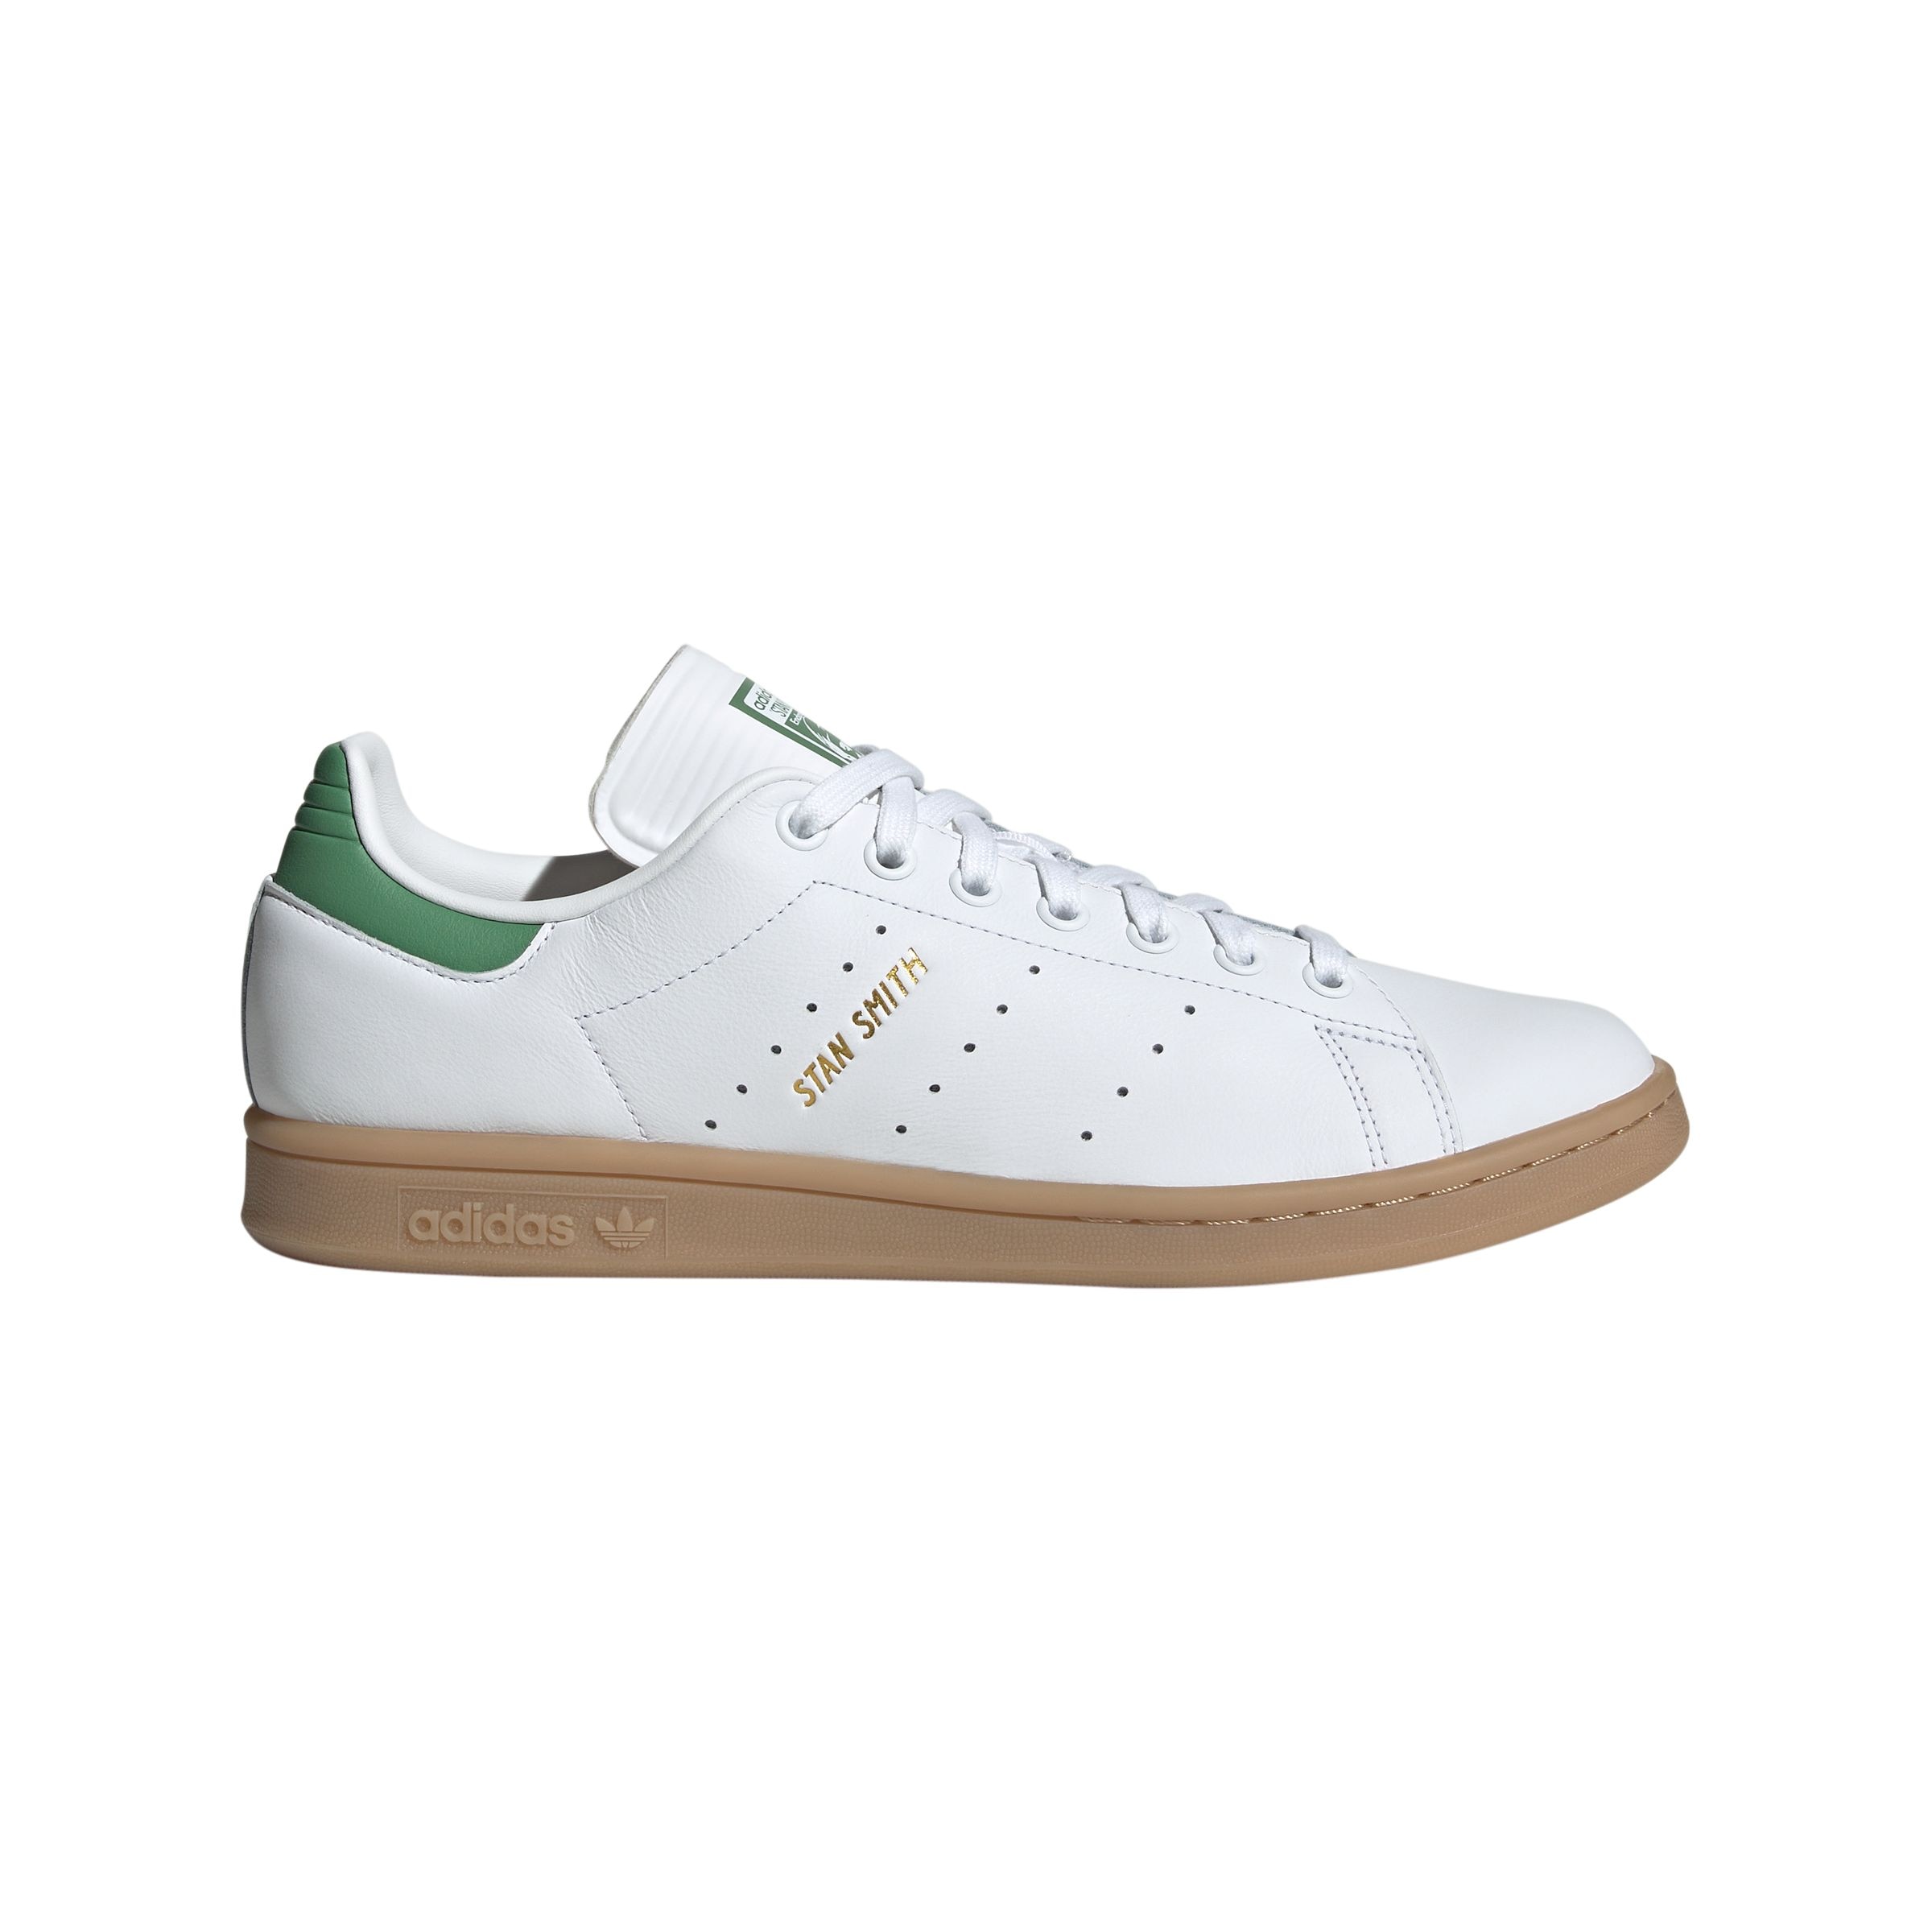 Image of adidas Men's Stan Smith Shoes